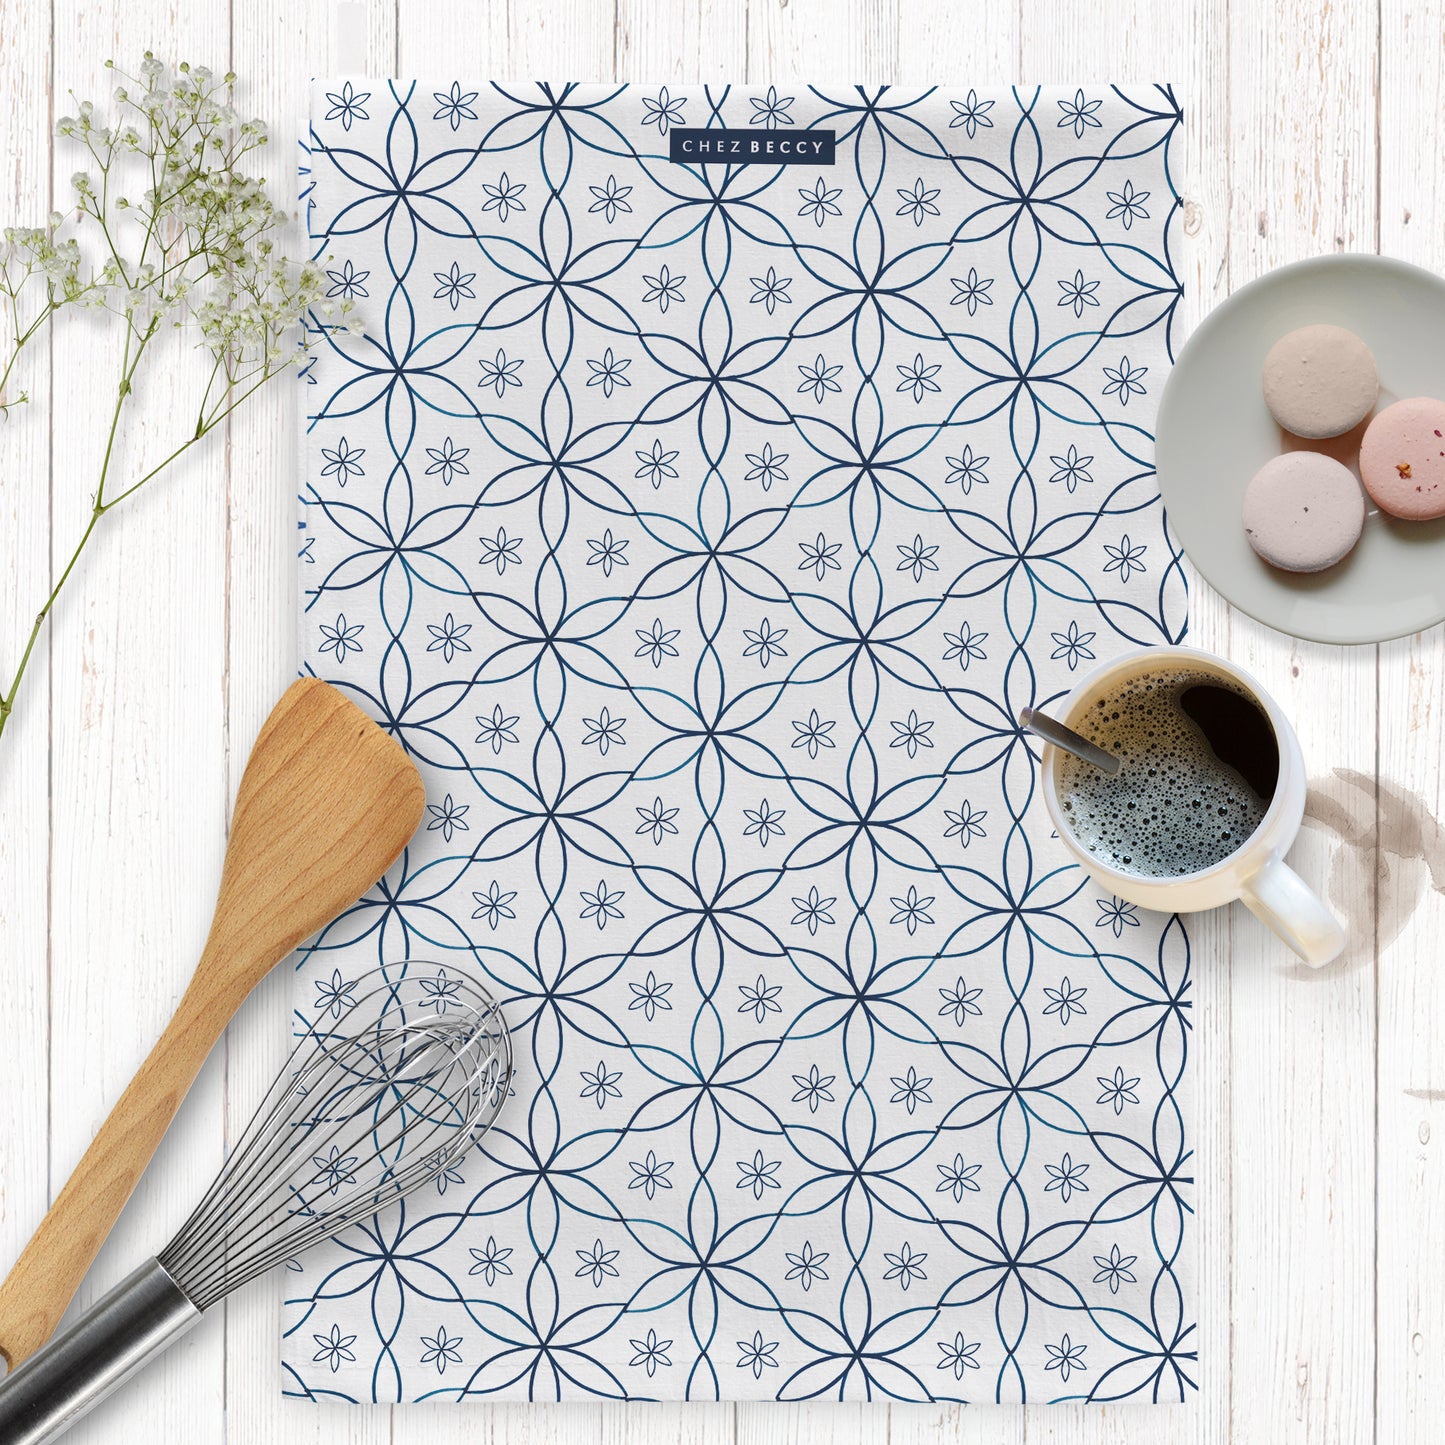 Geometric navy daisy design tea towel on a wooden background with baking props